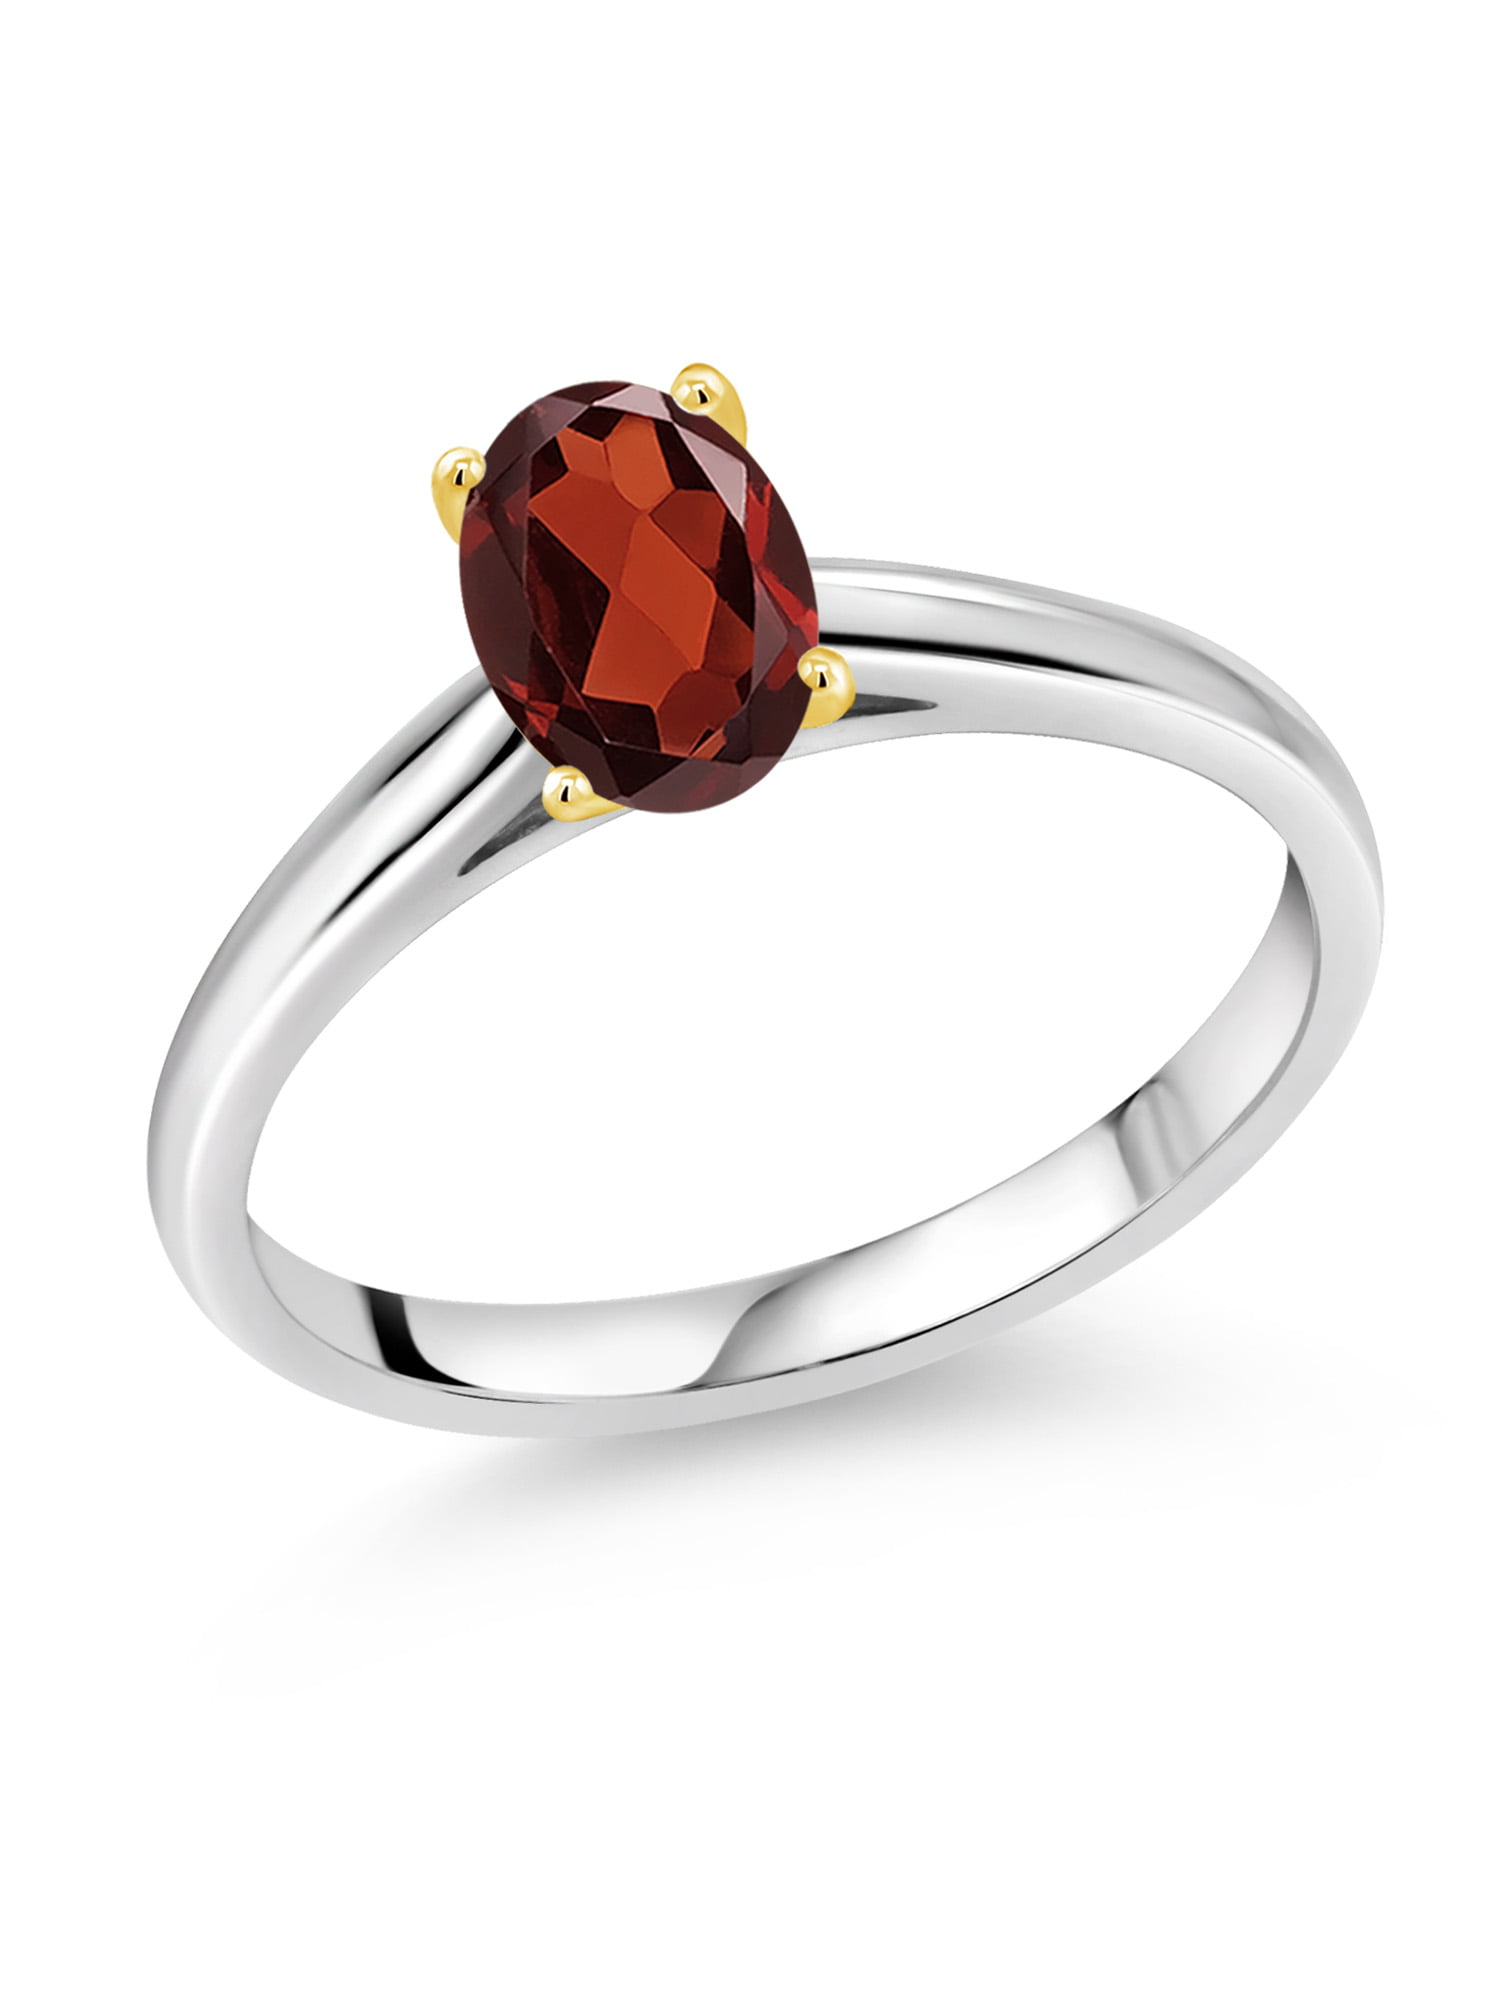 Gem Stone King 3.80 Ct Oval Red Garnet 18K Yellow Gold Plated Silver Ring 